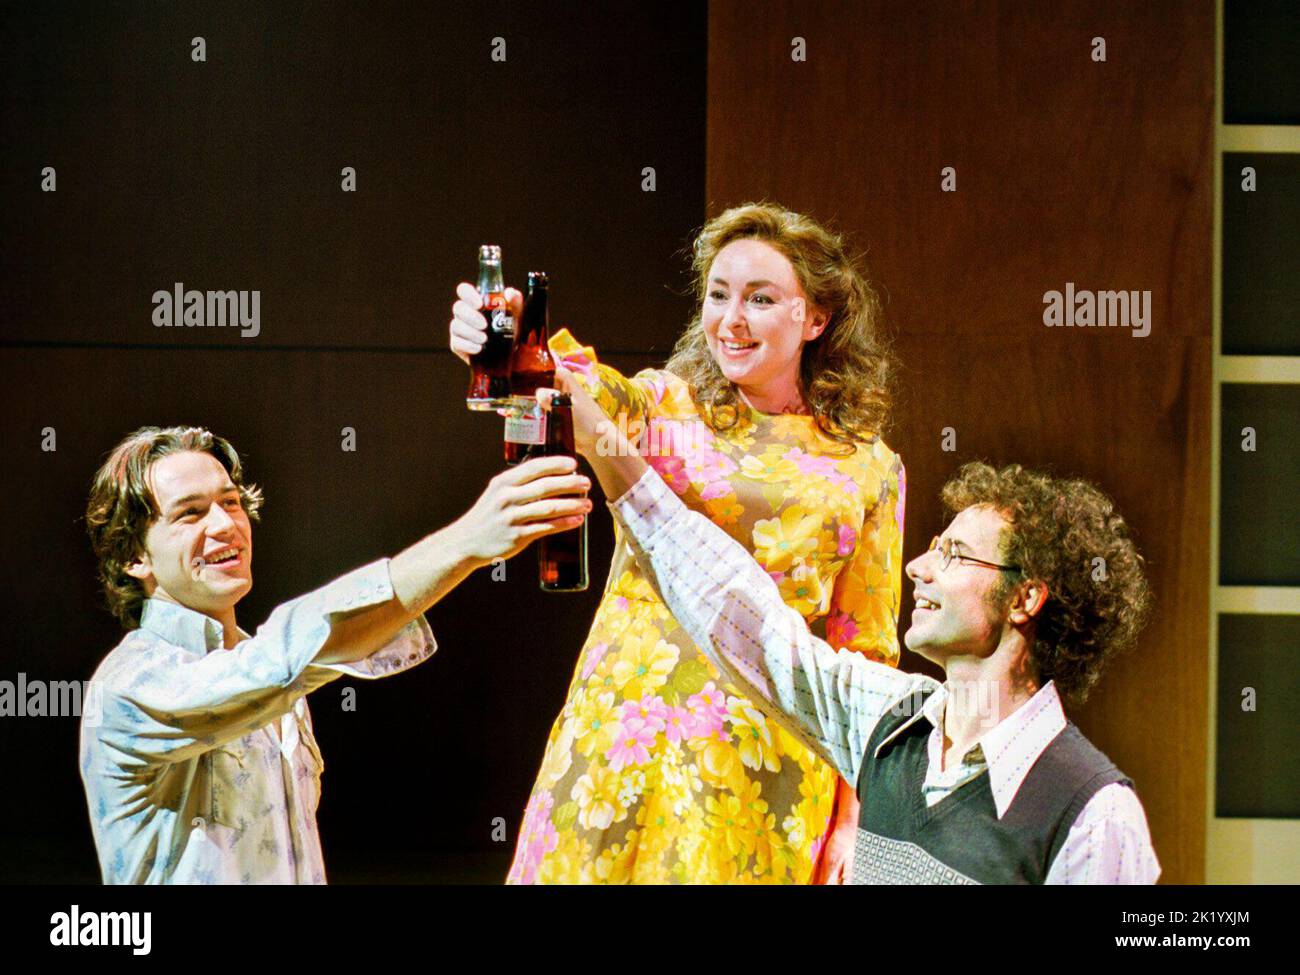 l-r: Julian Ovenden (Younger Franklin Shepard), Samantha Spiro (Mary Flynn), Daniel Evans (Charley Kringas) in MERRILY WE ROLL ALONG at the Donmar Warehouse, London WC2  11/12/2000  music & lyrics: Stephen Sondheim  book: George Furth  based on the original play by Kaufman & Hart  design: Christopher Oram  lighting: Tim Mitchell  choreography: Peter Darling  director: Michael Grandage Stock Photo